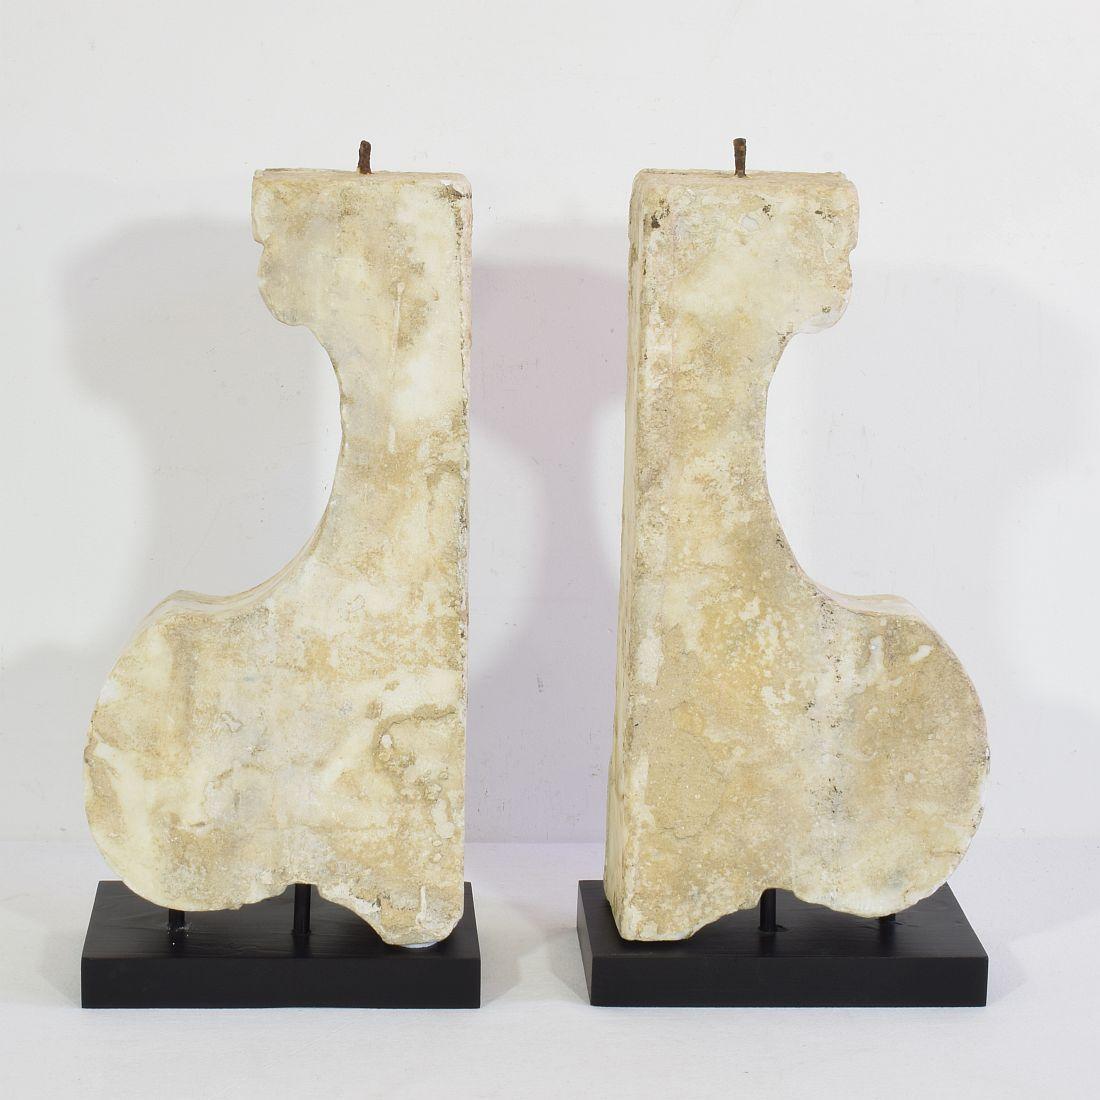 Hand-Carved Pair of 17th/ 18th Century Italian White Marble Baroque Ornaments For Sale